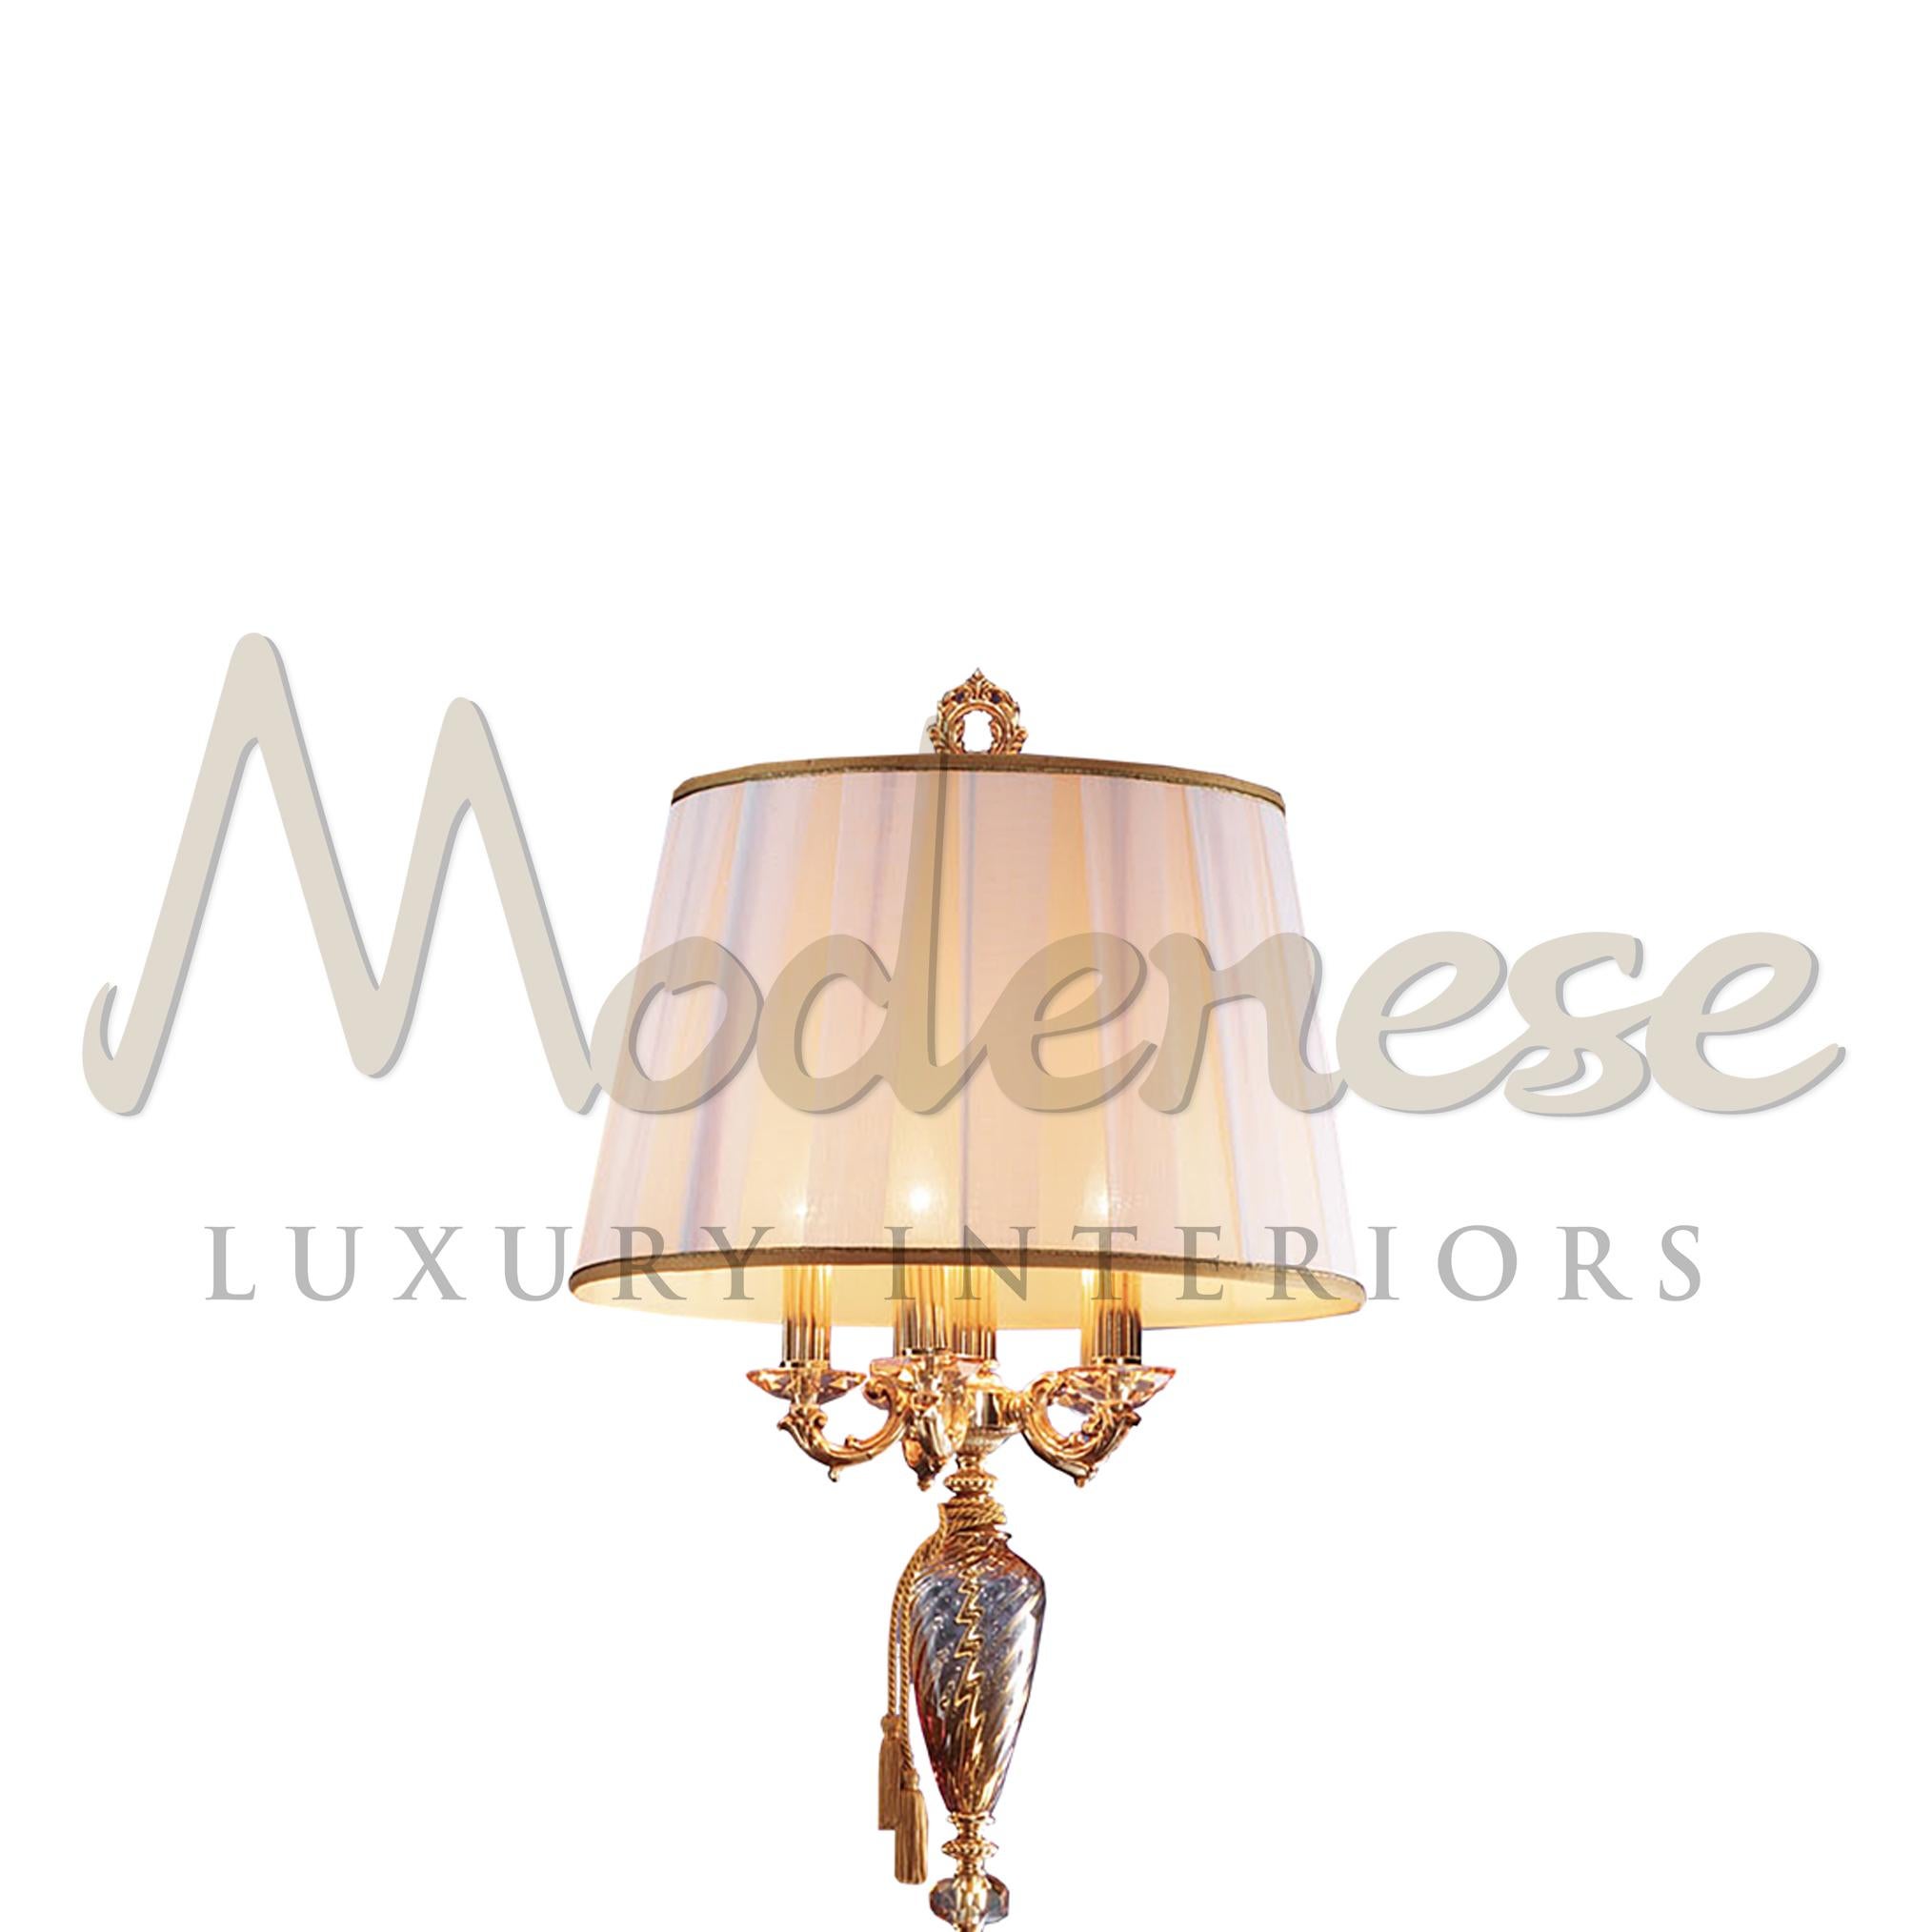 Dive into luxury with this Modenese Luxury Interiors amber glass floor lamp. The straight line of the central pole, decorated with a french gold plated finish, delicately supports 4 lightbulbs protected by a wide ivory lampshade. Modenese rewrites